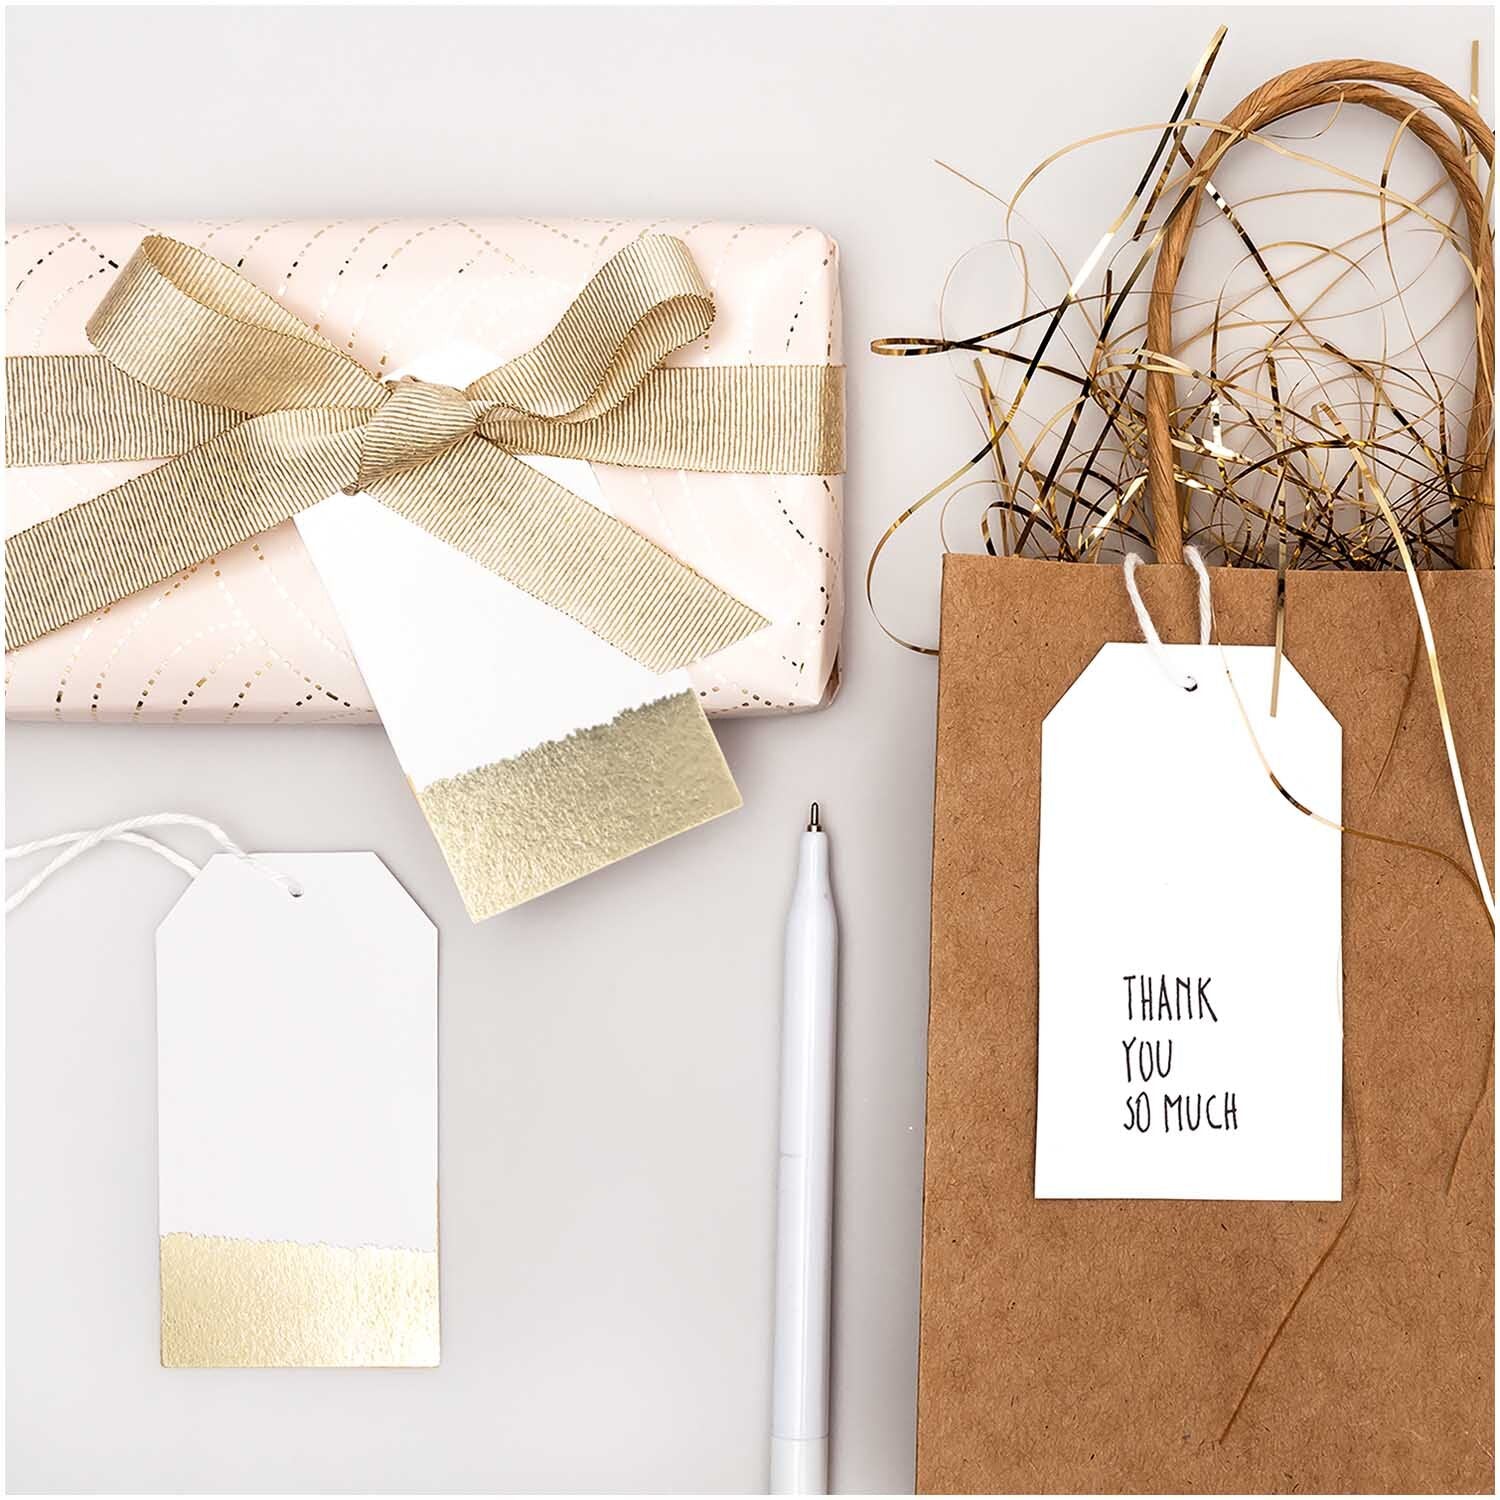 GOLD EDGE GIFT TAGS